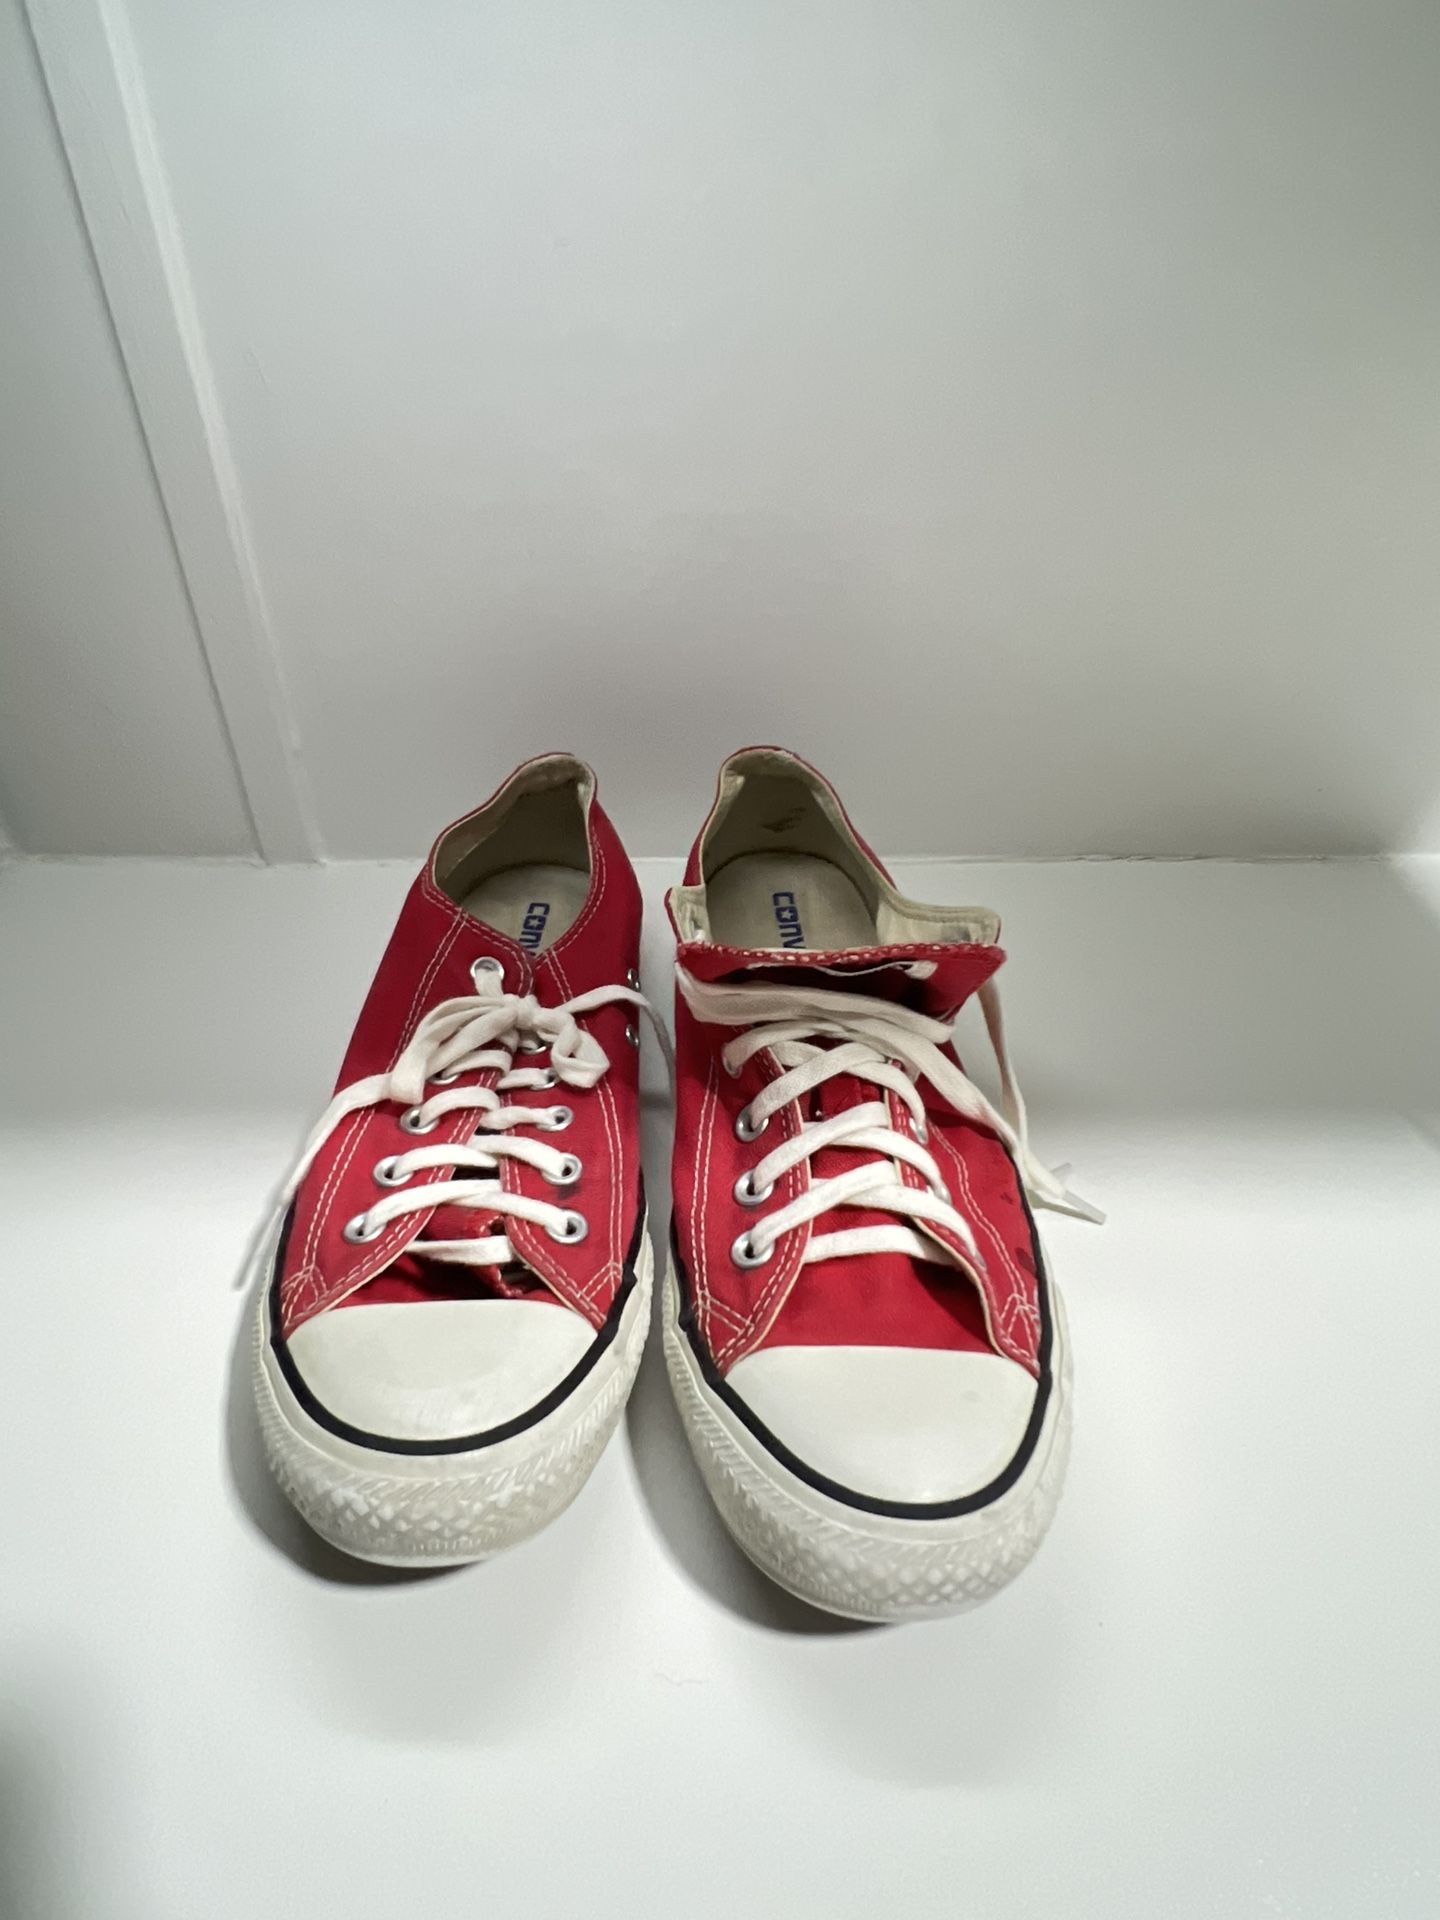 Converse All Star Chuck Taylor OX Mens Shoes 7 Womens 9 Low Top Sneakers Red Fair condition 